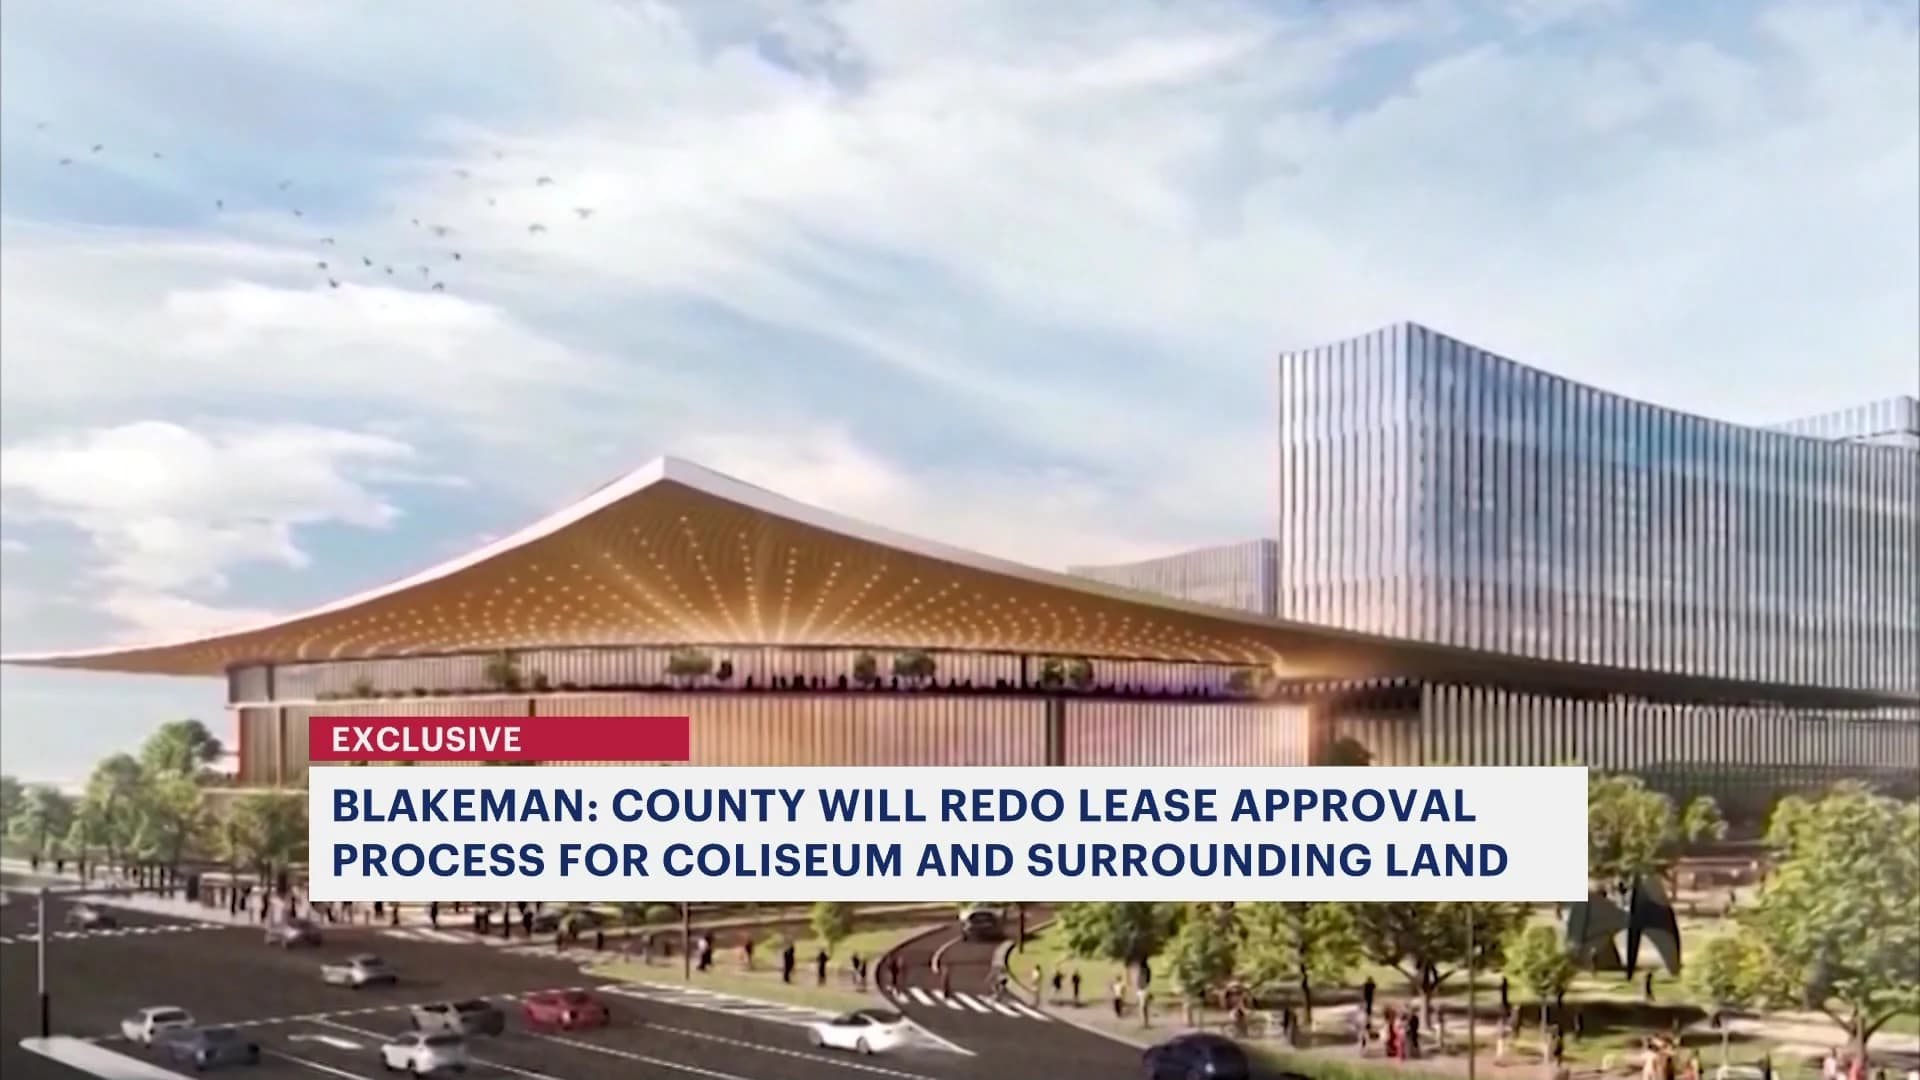 Nassau County says it will rework its lease approval process in effort to build resort and casino